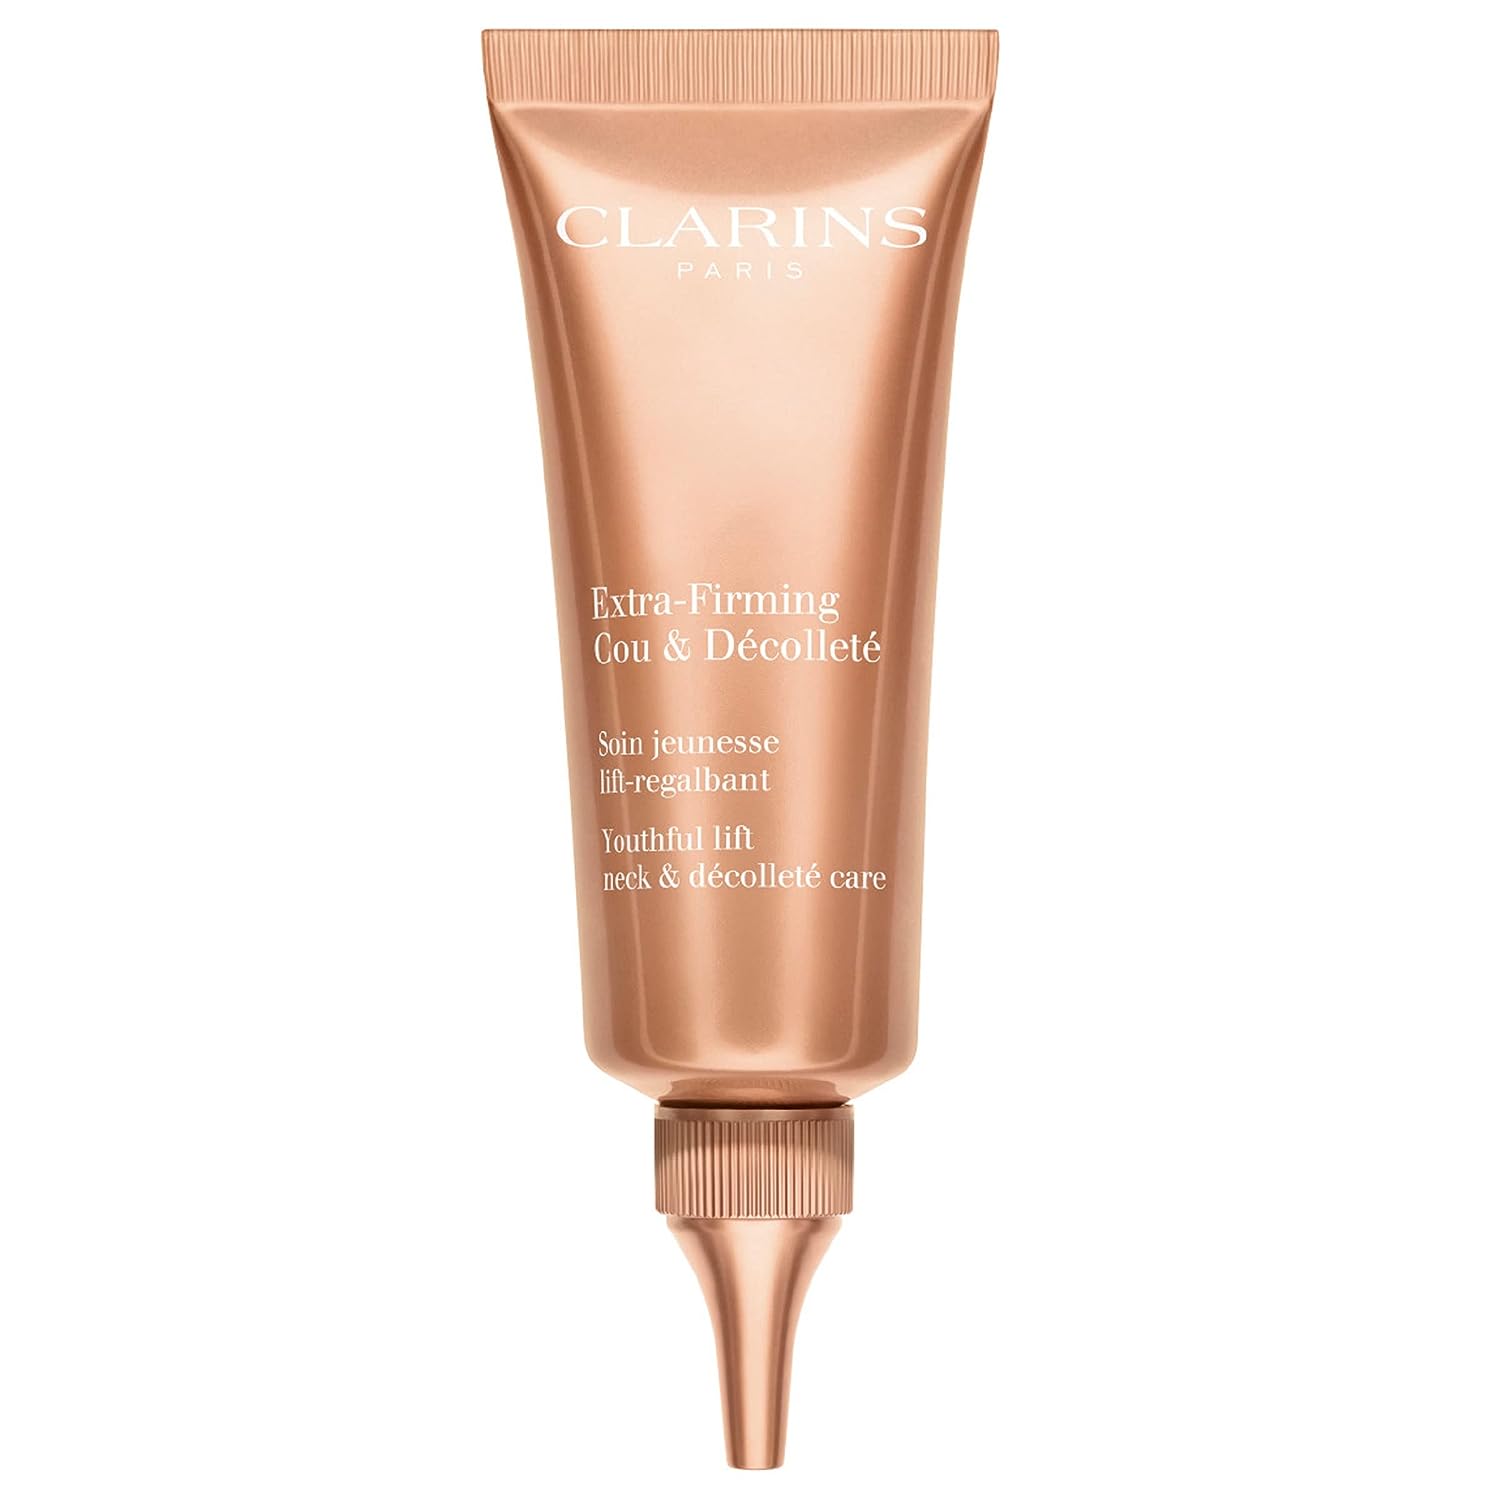 Clarins Extra-Firming Neck and Décolleté Cream | Award-Winning | Anti-Aging Moisturizer | Visibly Firms, Smoothes and Lifts | Minimizes Appearance Of Wrinkles | Targets Dark Spots | 2.5